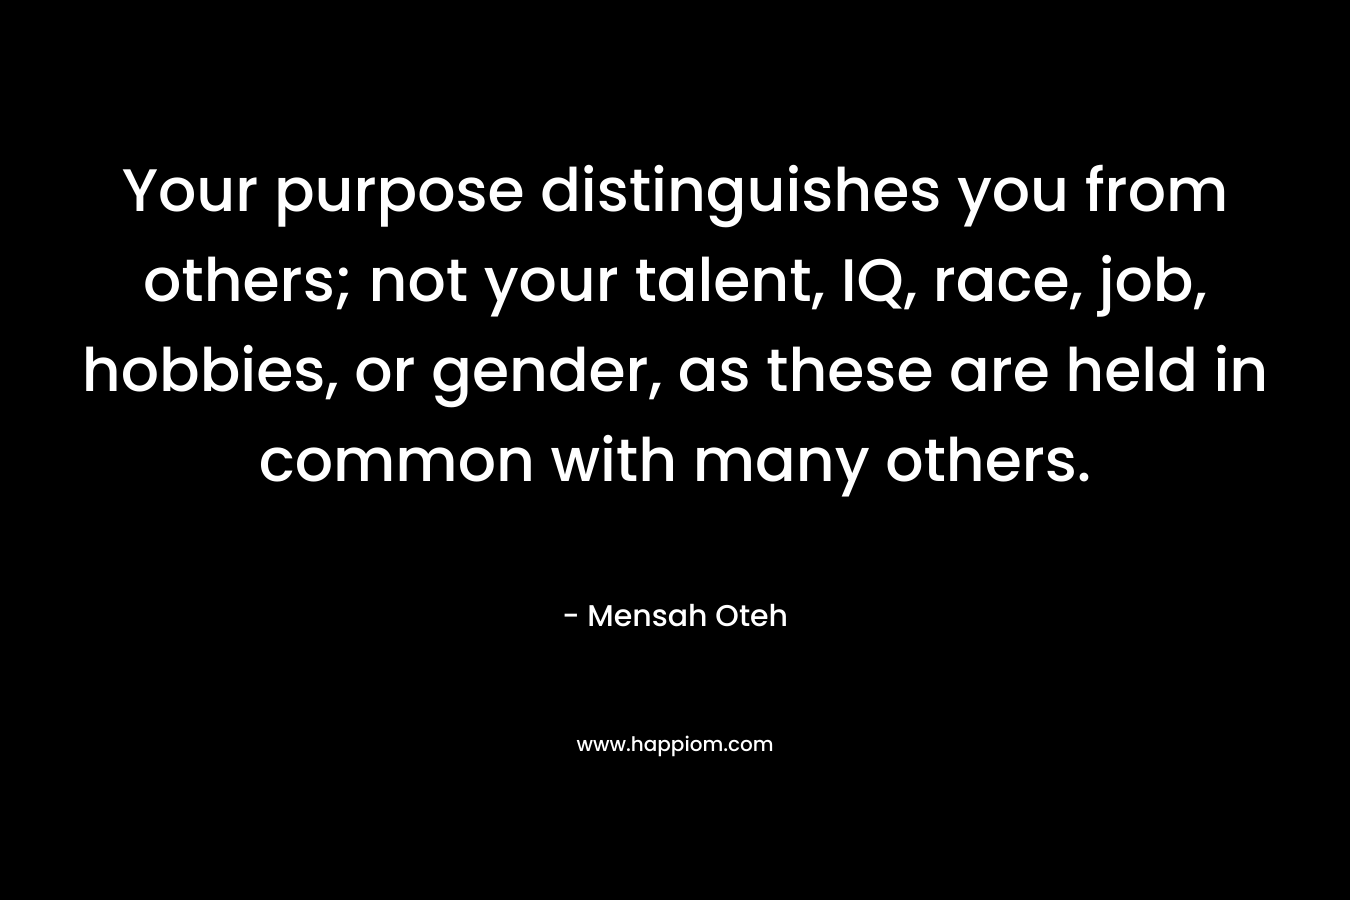 Your purpose distinguishes you from others; not your talent, IQ, race, job, hobbies, or gender, as these are held in common with many others.